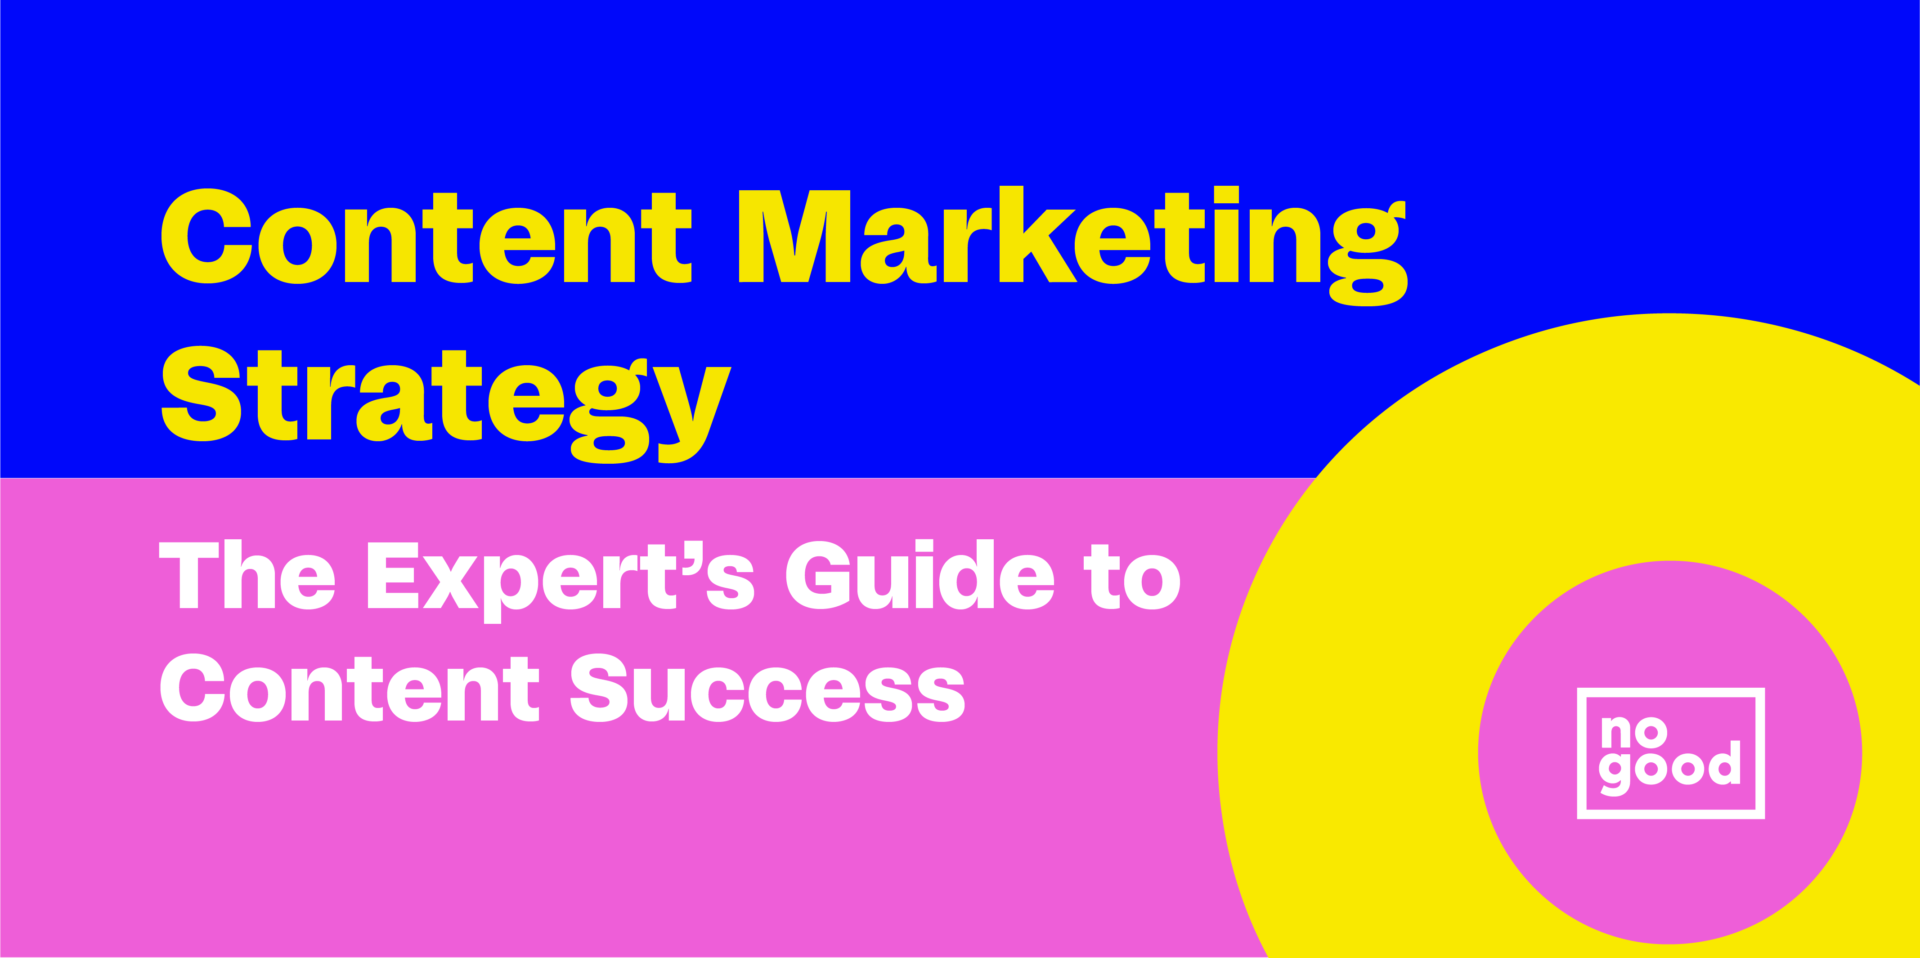 Content Marketing Strategy Guide